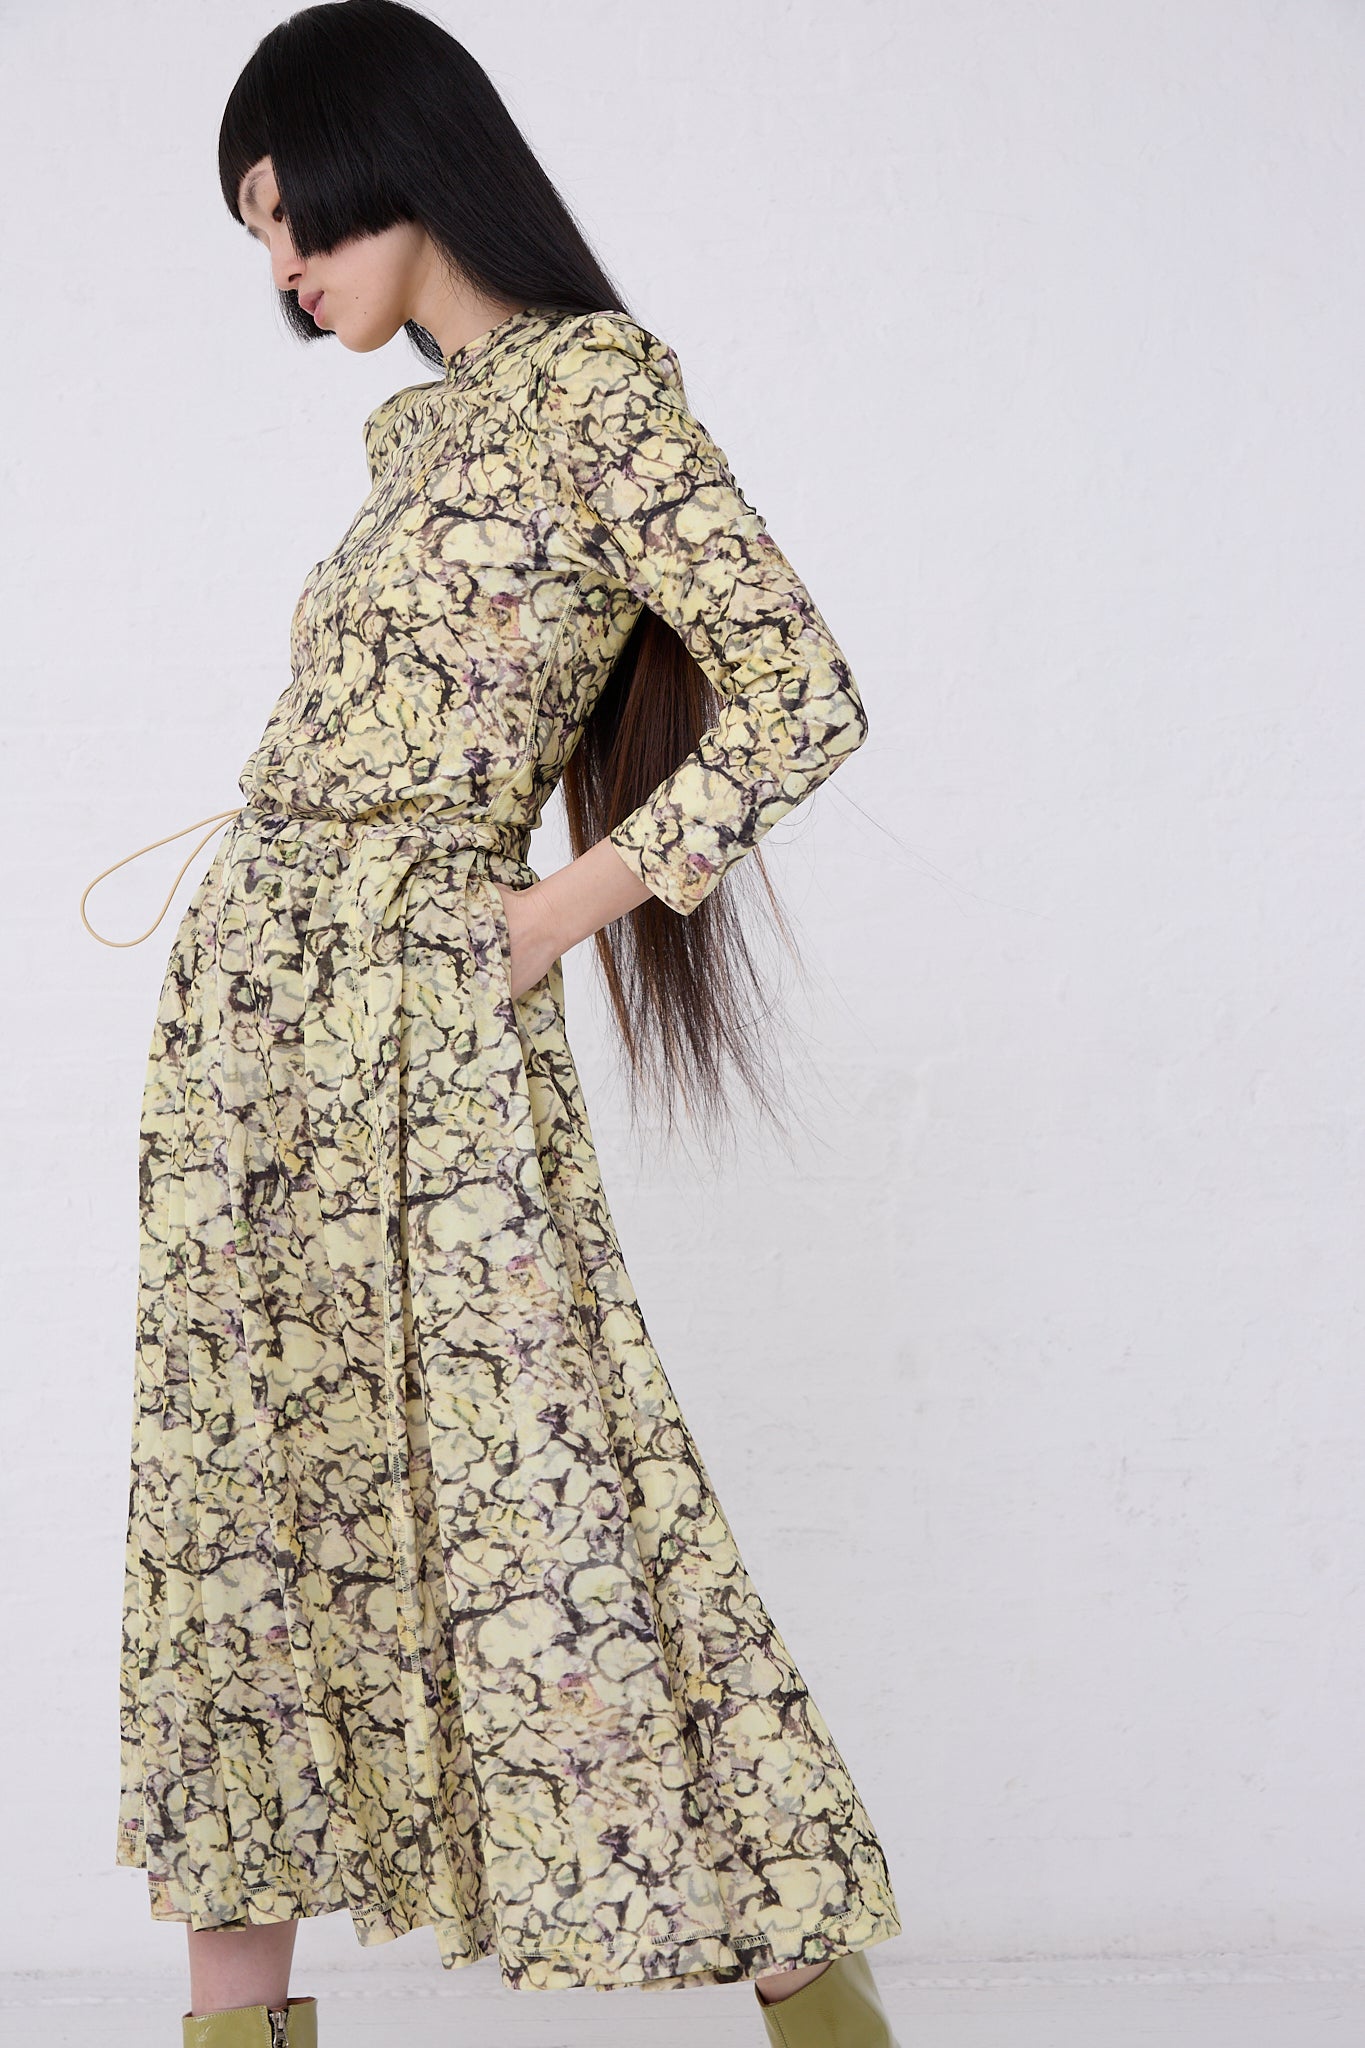 Woman in a TOGA ARCHIVES Tricot Print Dress in Yellow and high ponytail posing sideways against a white backdrop.